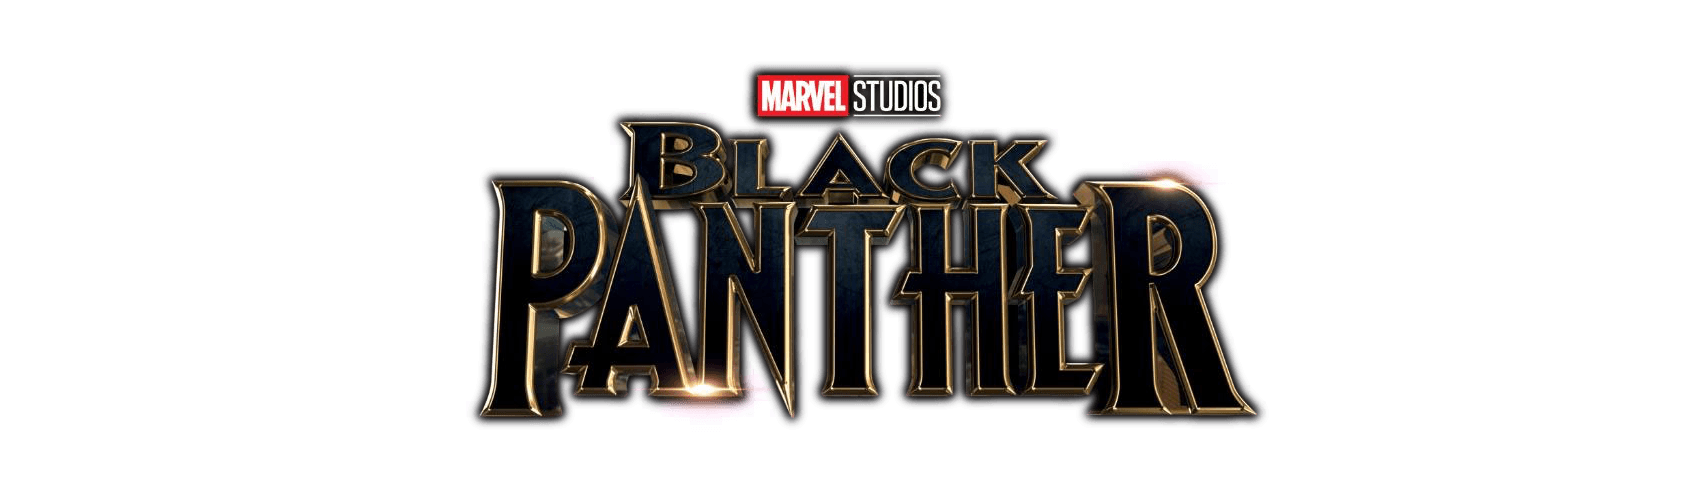 Black Panther Movie Logo - Black Panther: The Most Important Superhero Movie Since Ironman